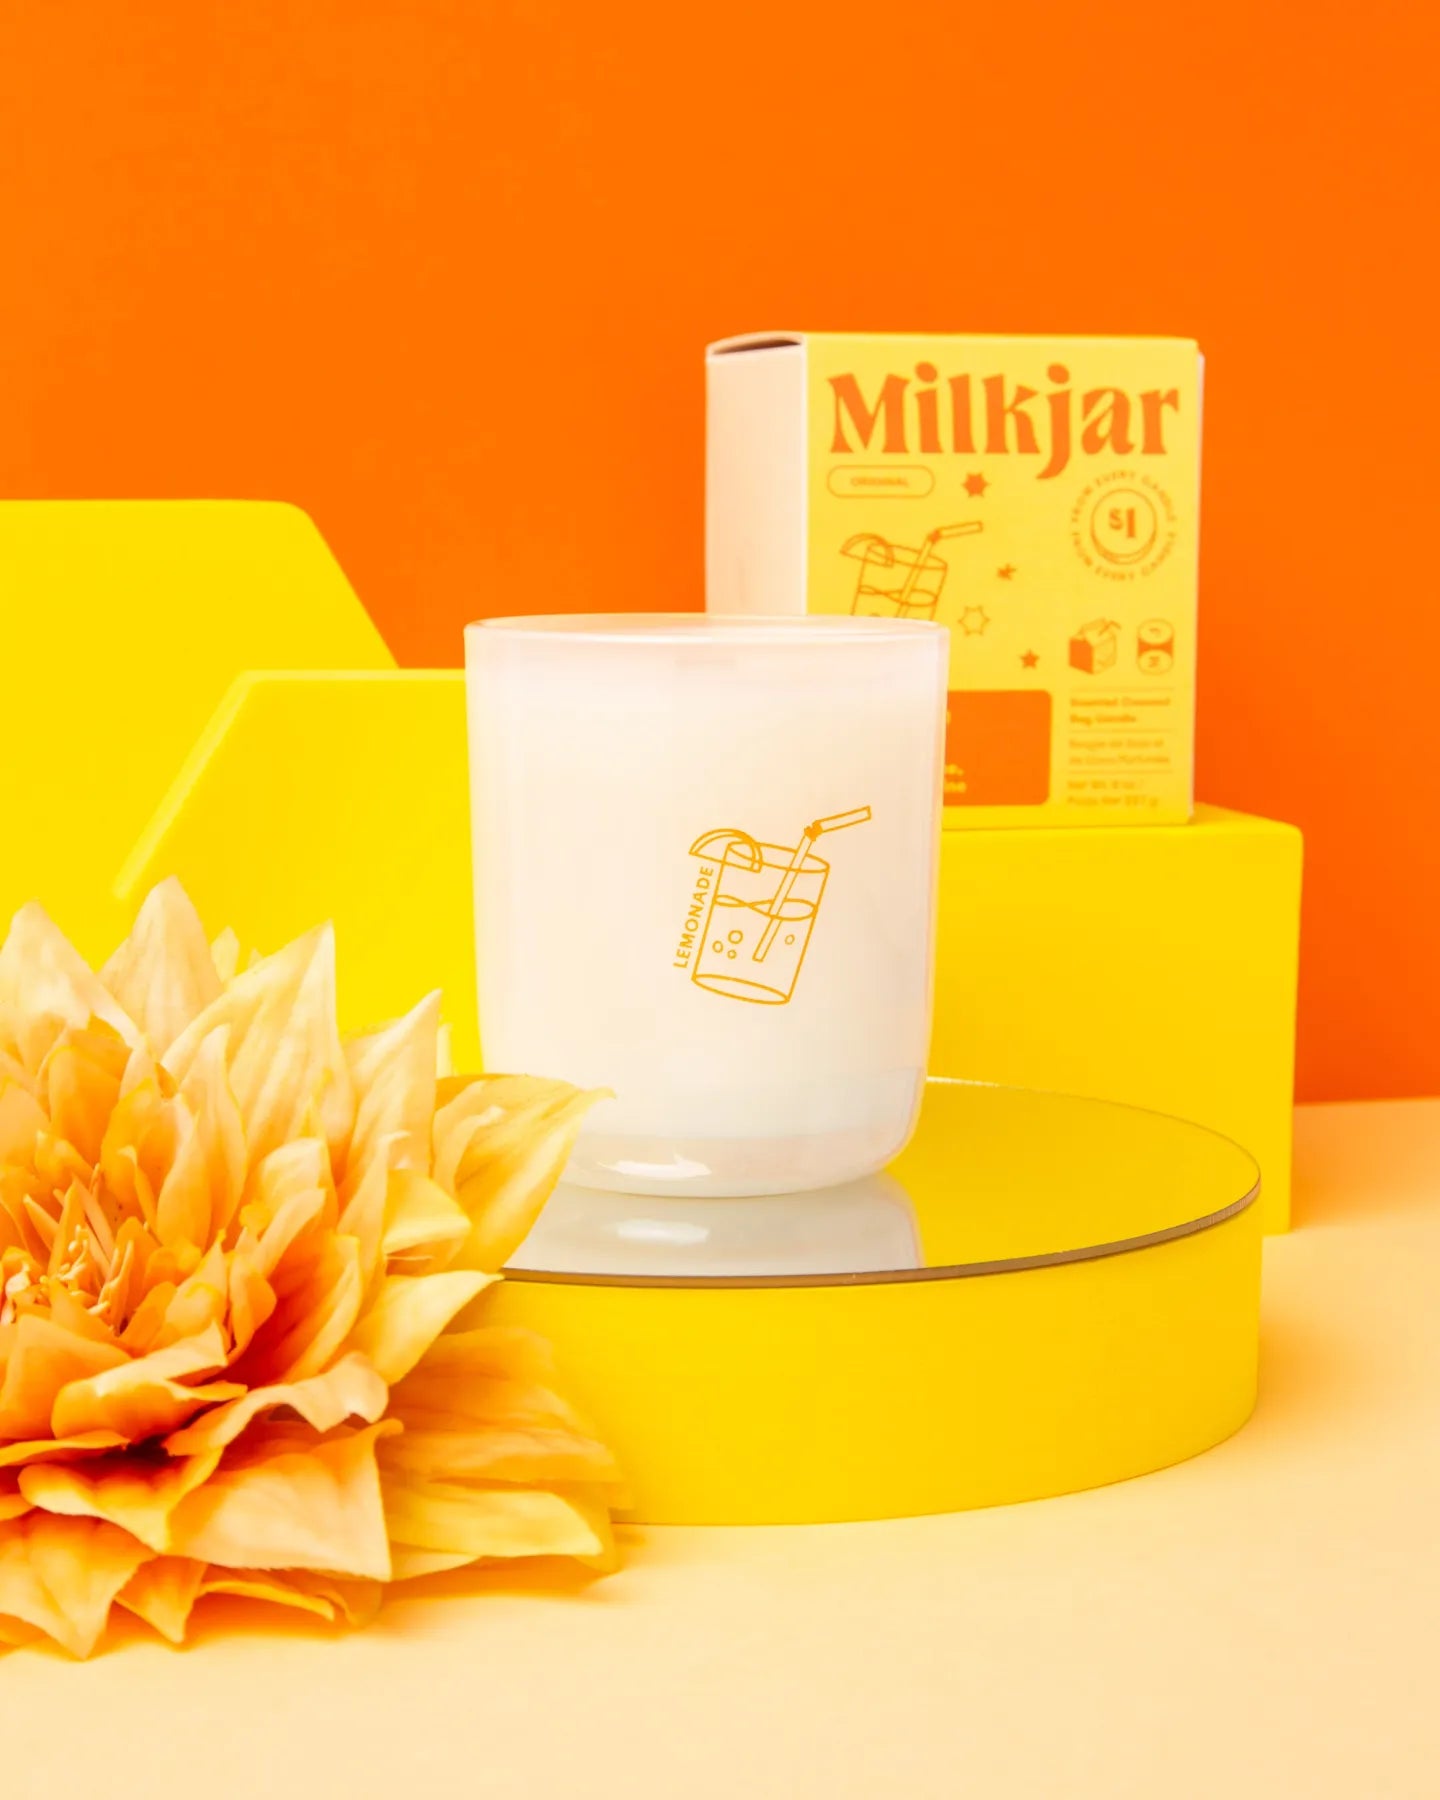 Milk Jar Candle Co. Lemonade Scented Candle - Osmology Scented Candles & Home Fragrance